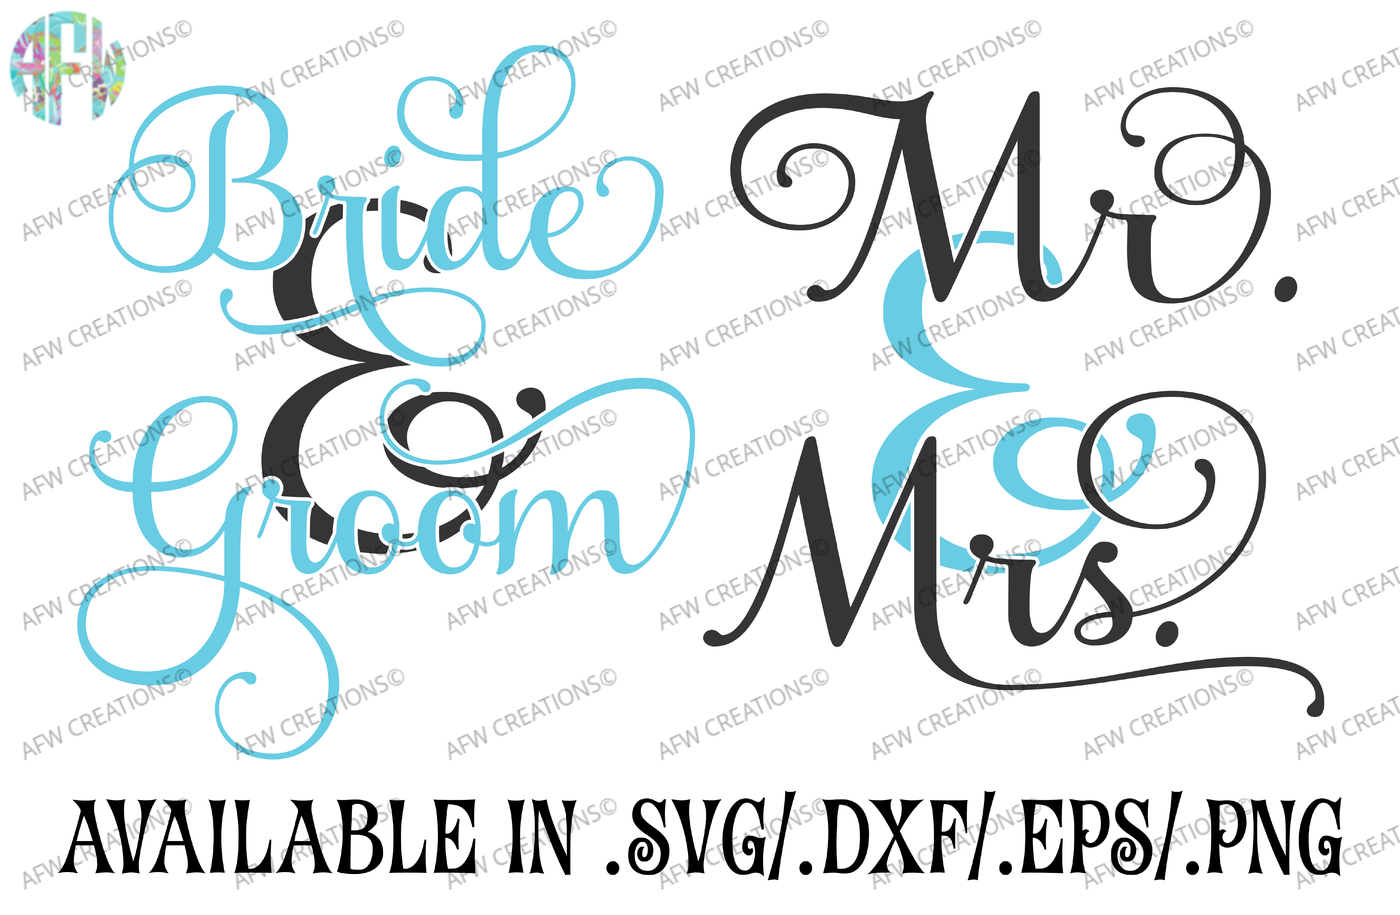 Download Wedding Designs - SVG, DXF, EPS Cut Files By AFW Designs | TheHungryJPEG.com